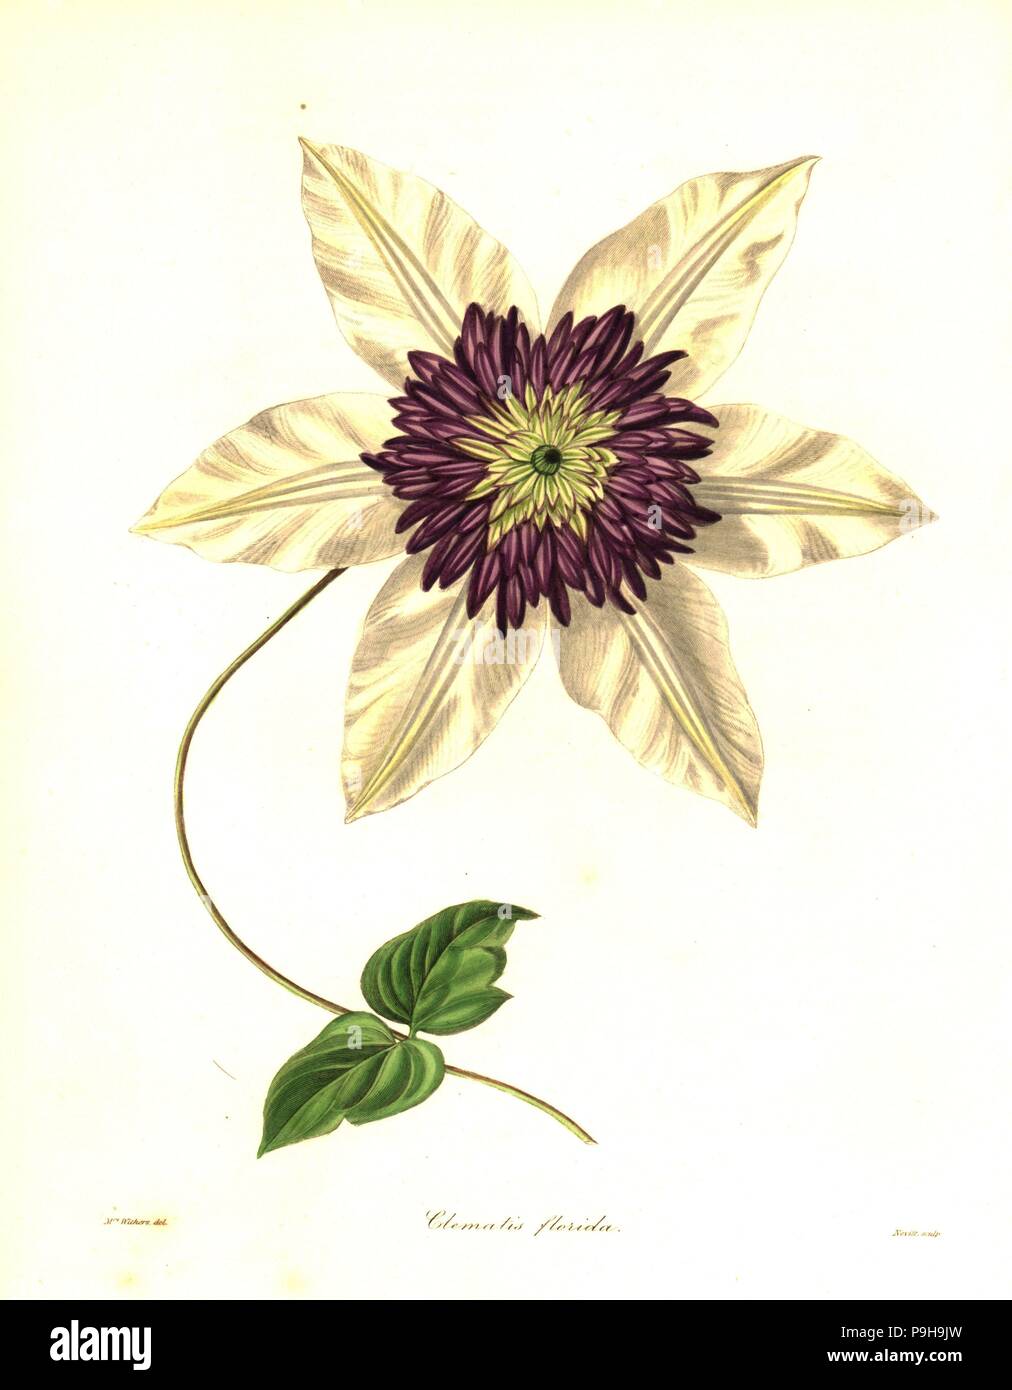 Siebold's clematis, Clematis florida. Handcoloured copperplate engraving by S. Nevitt after a botanical illustration by Mrs Augusta Withers from Benjamin Maund and the Rev. John Stevens Henslow's The Botanist, London, 1836. Stock Photo